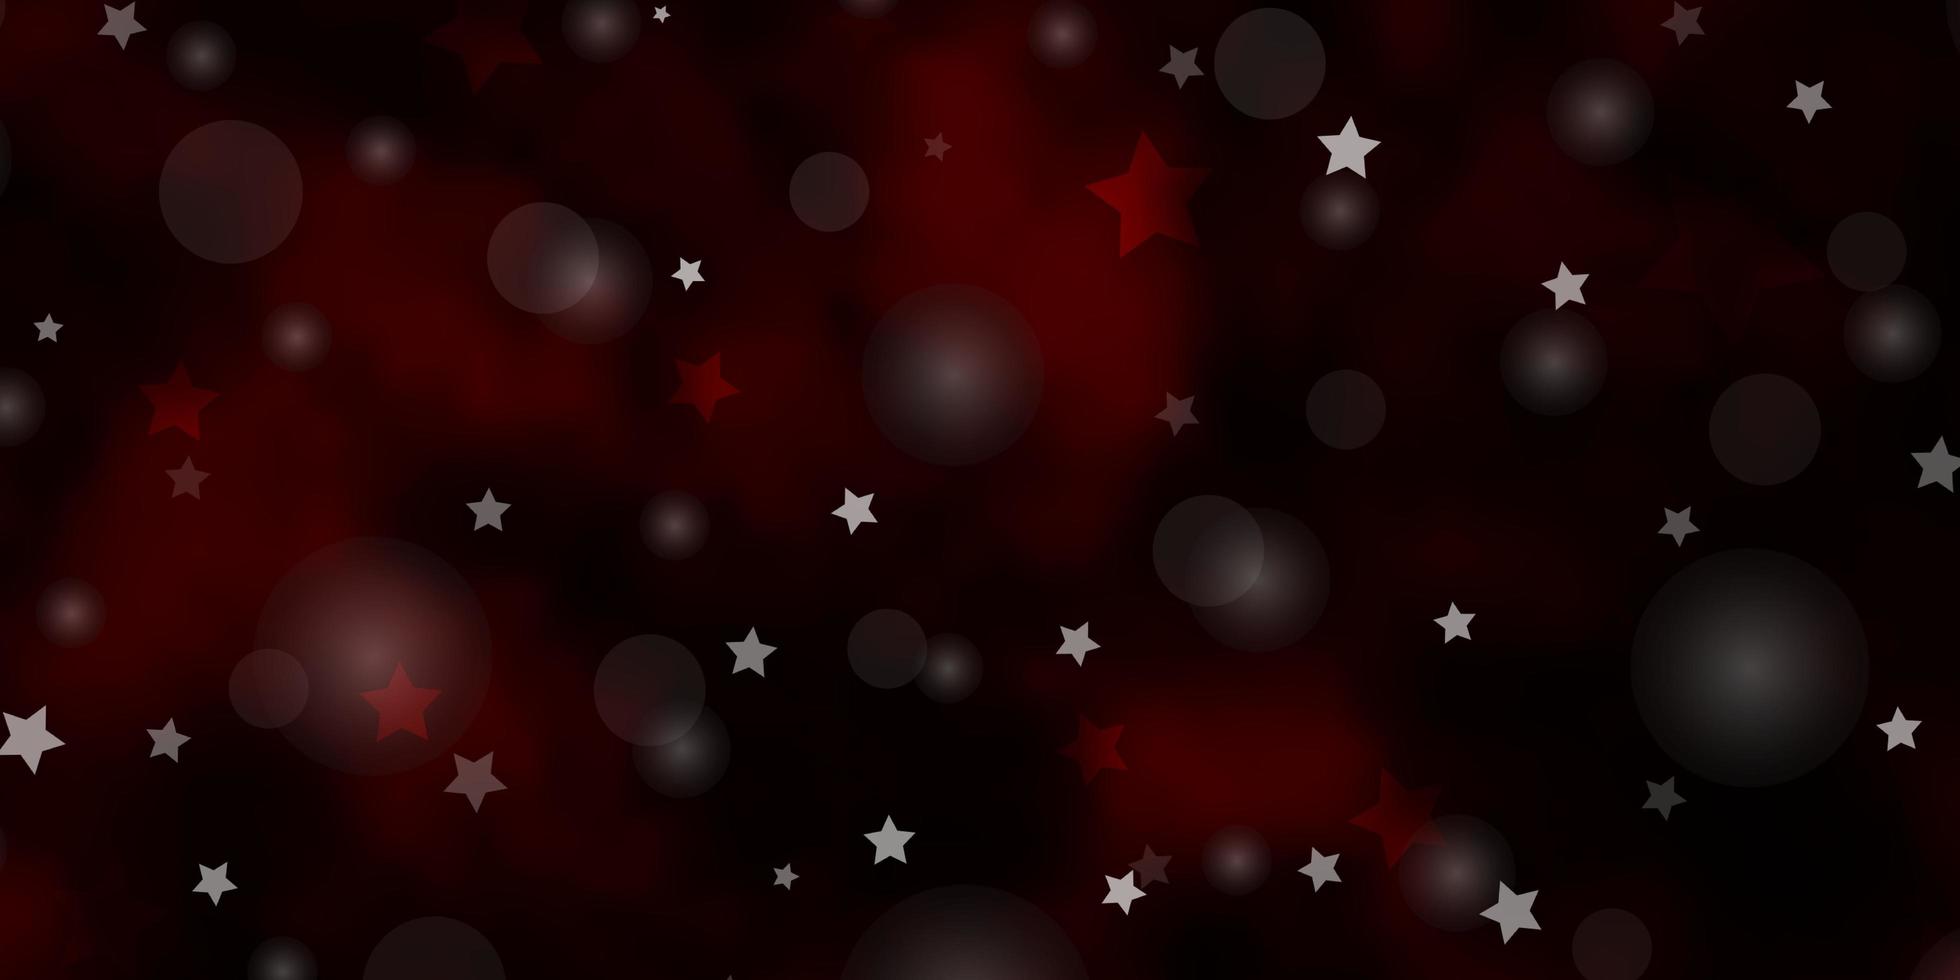 Dark Red vector layout with circles, stars. Illustration with set of colorful abstract spheres, stars. Design for wallpaper, fabric makers.